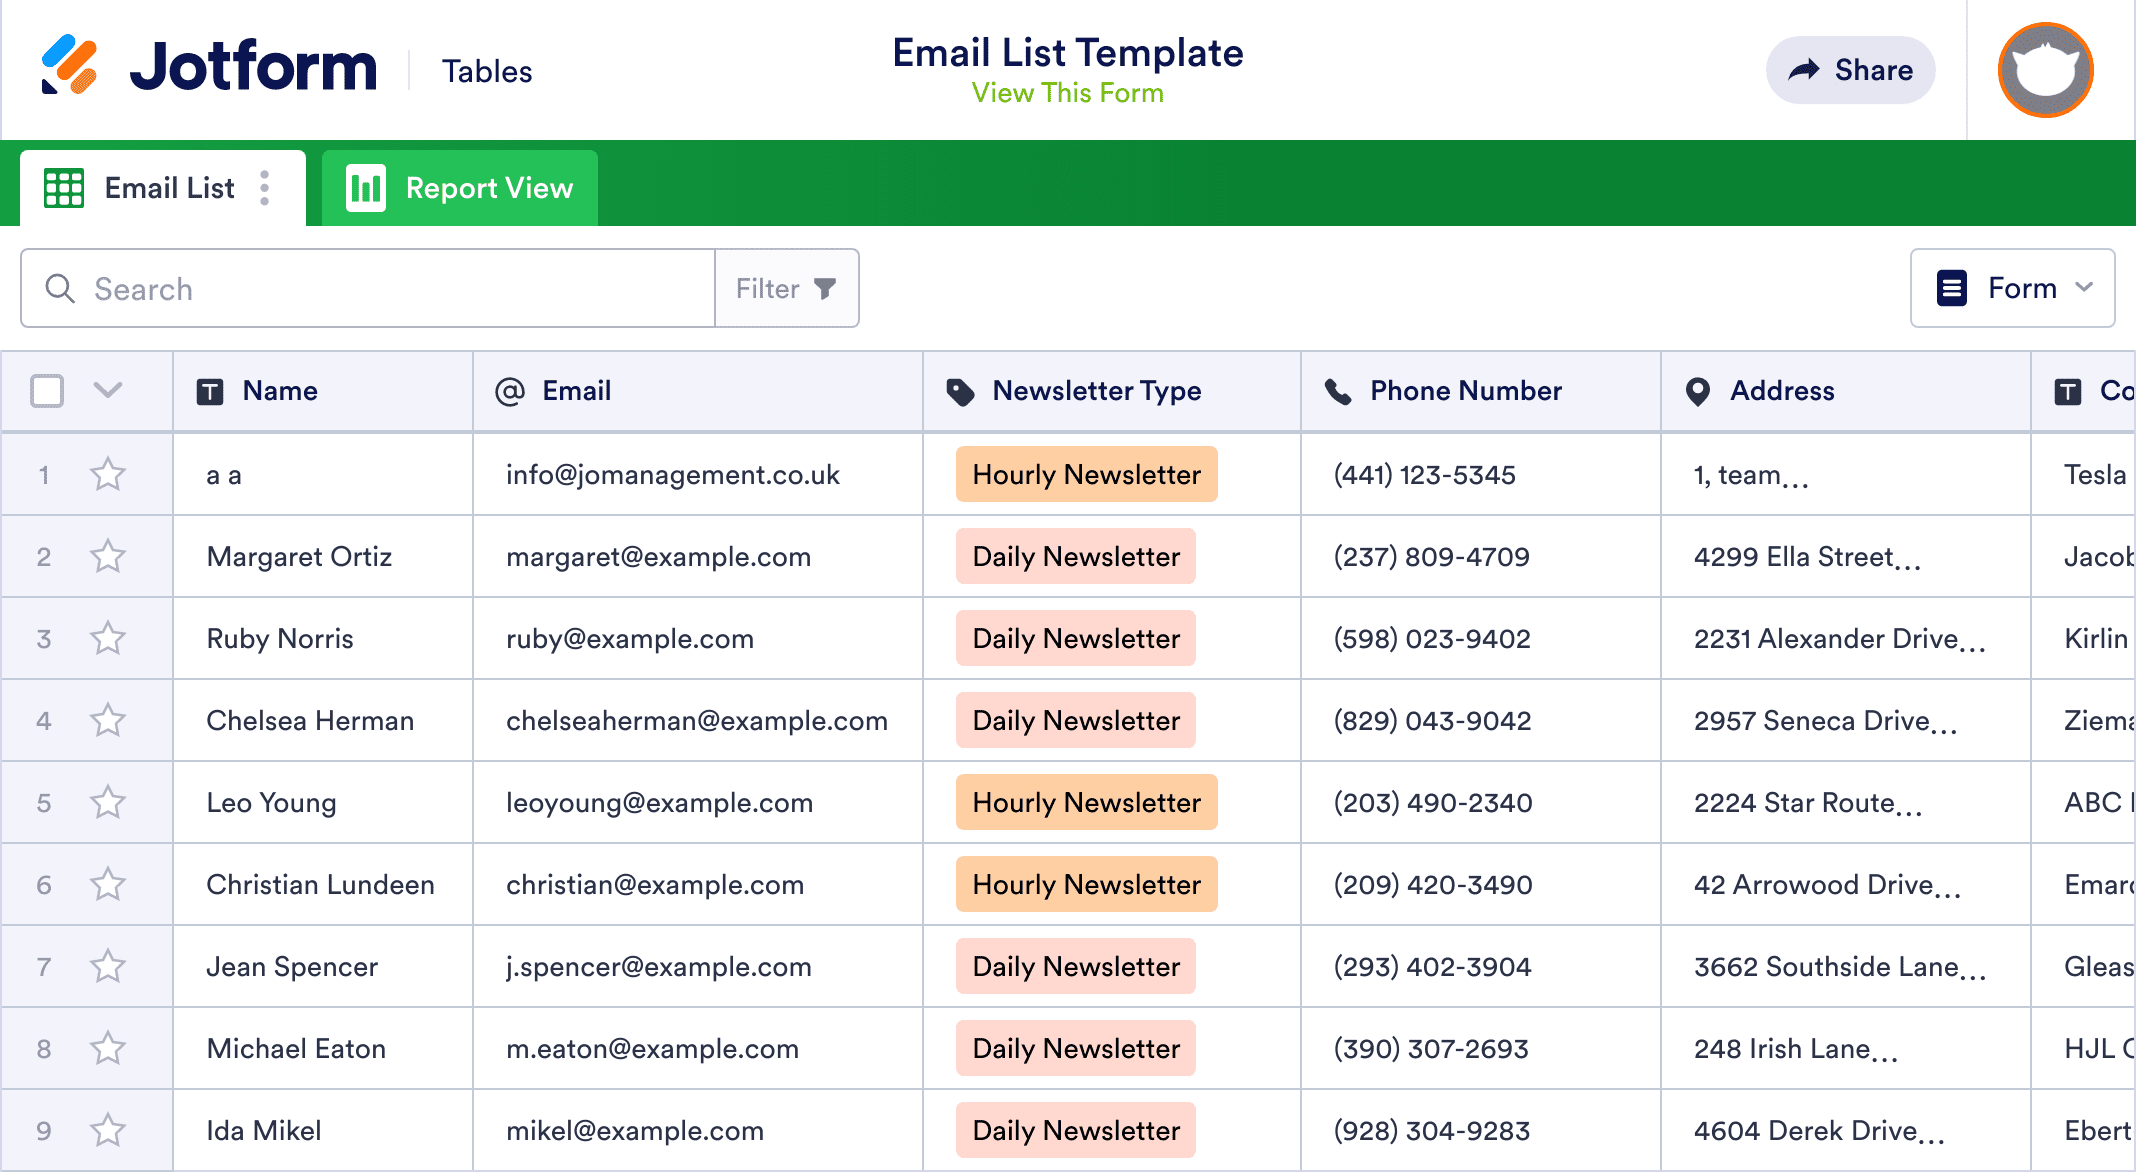 37-free-email-list-templates-pdf-ms-word-excel-templatelab